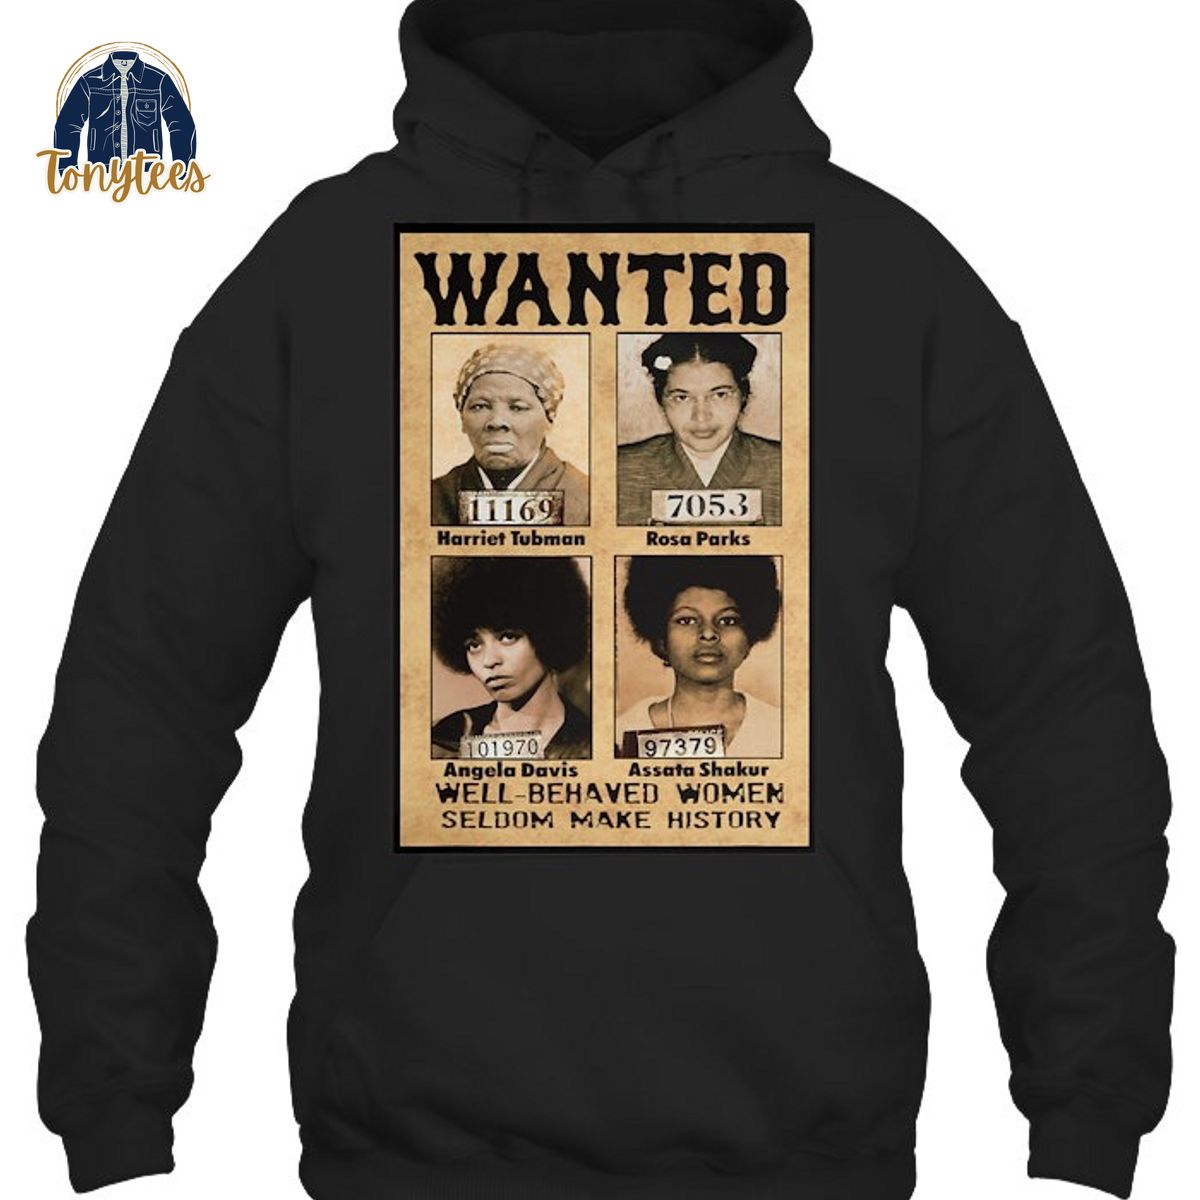 Wanted Well Behaved Women Seldom Make History African American T Shirt